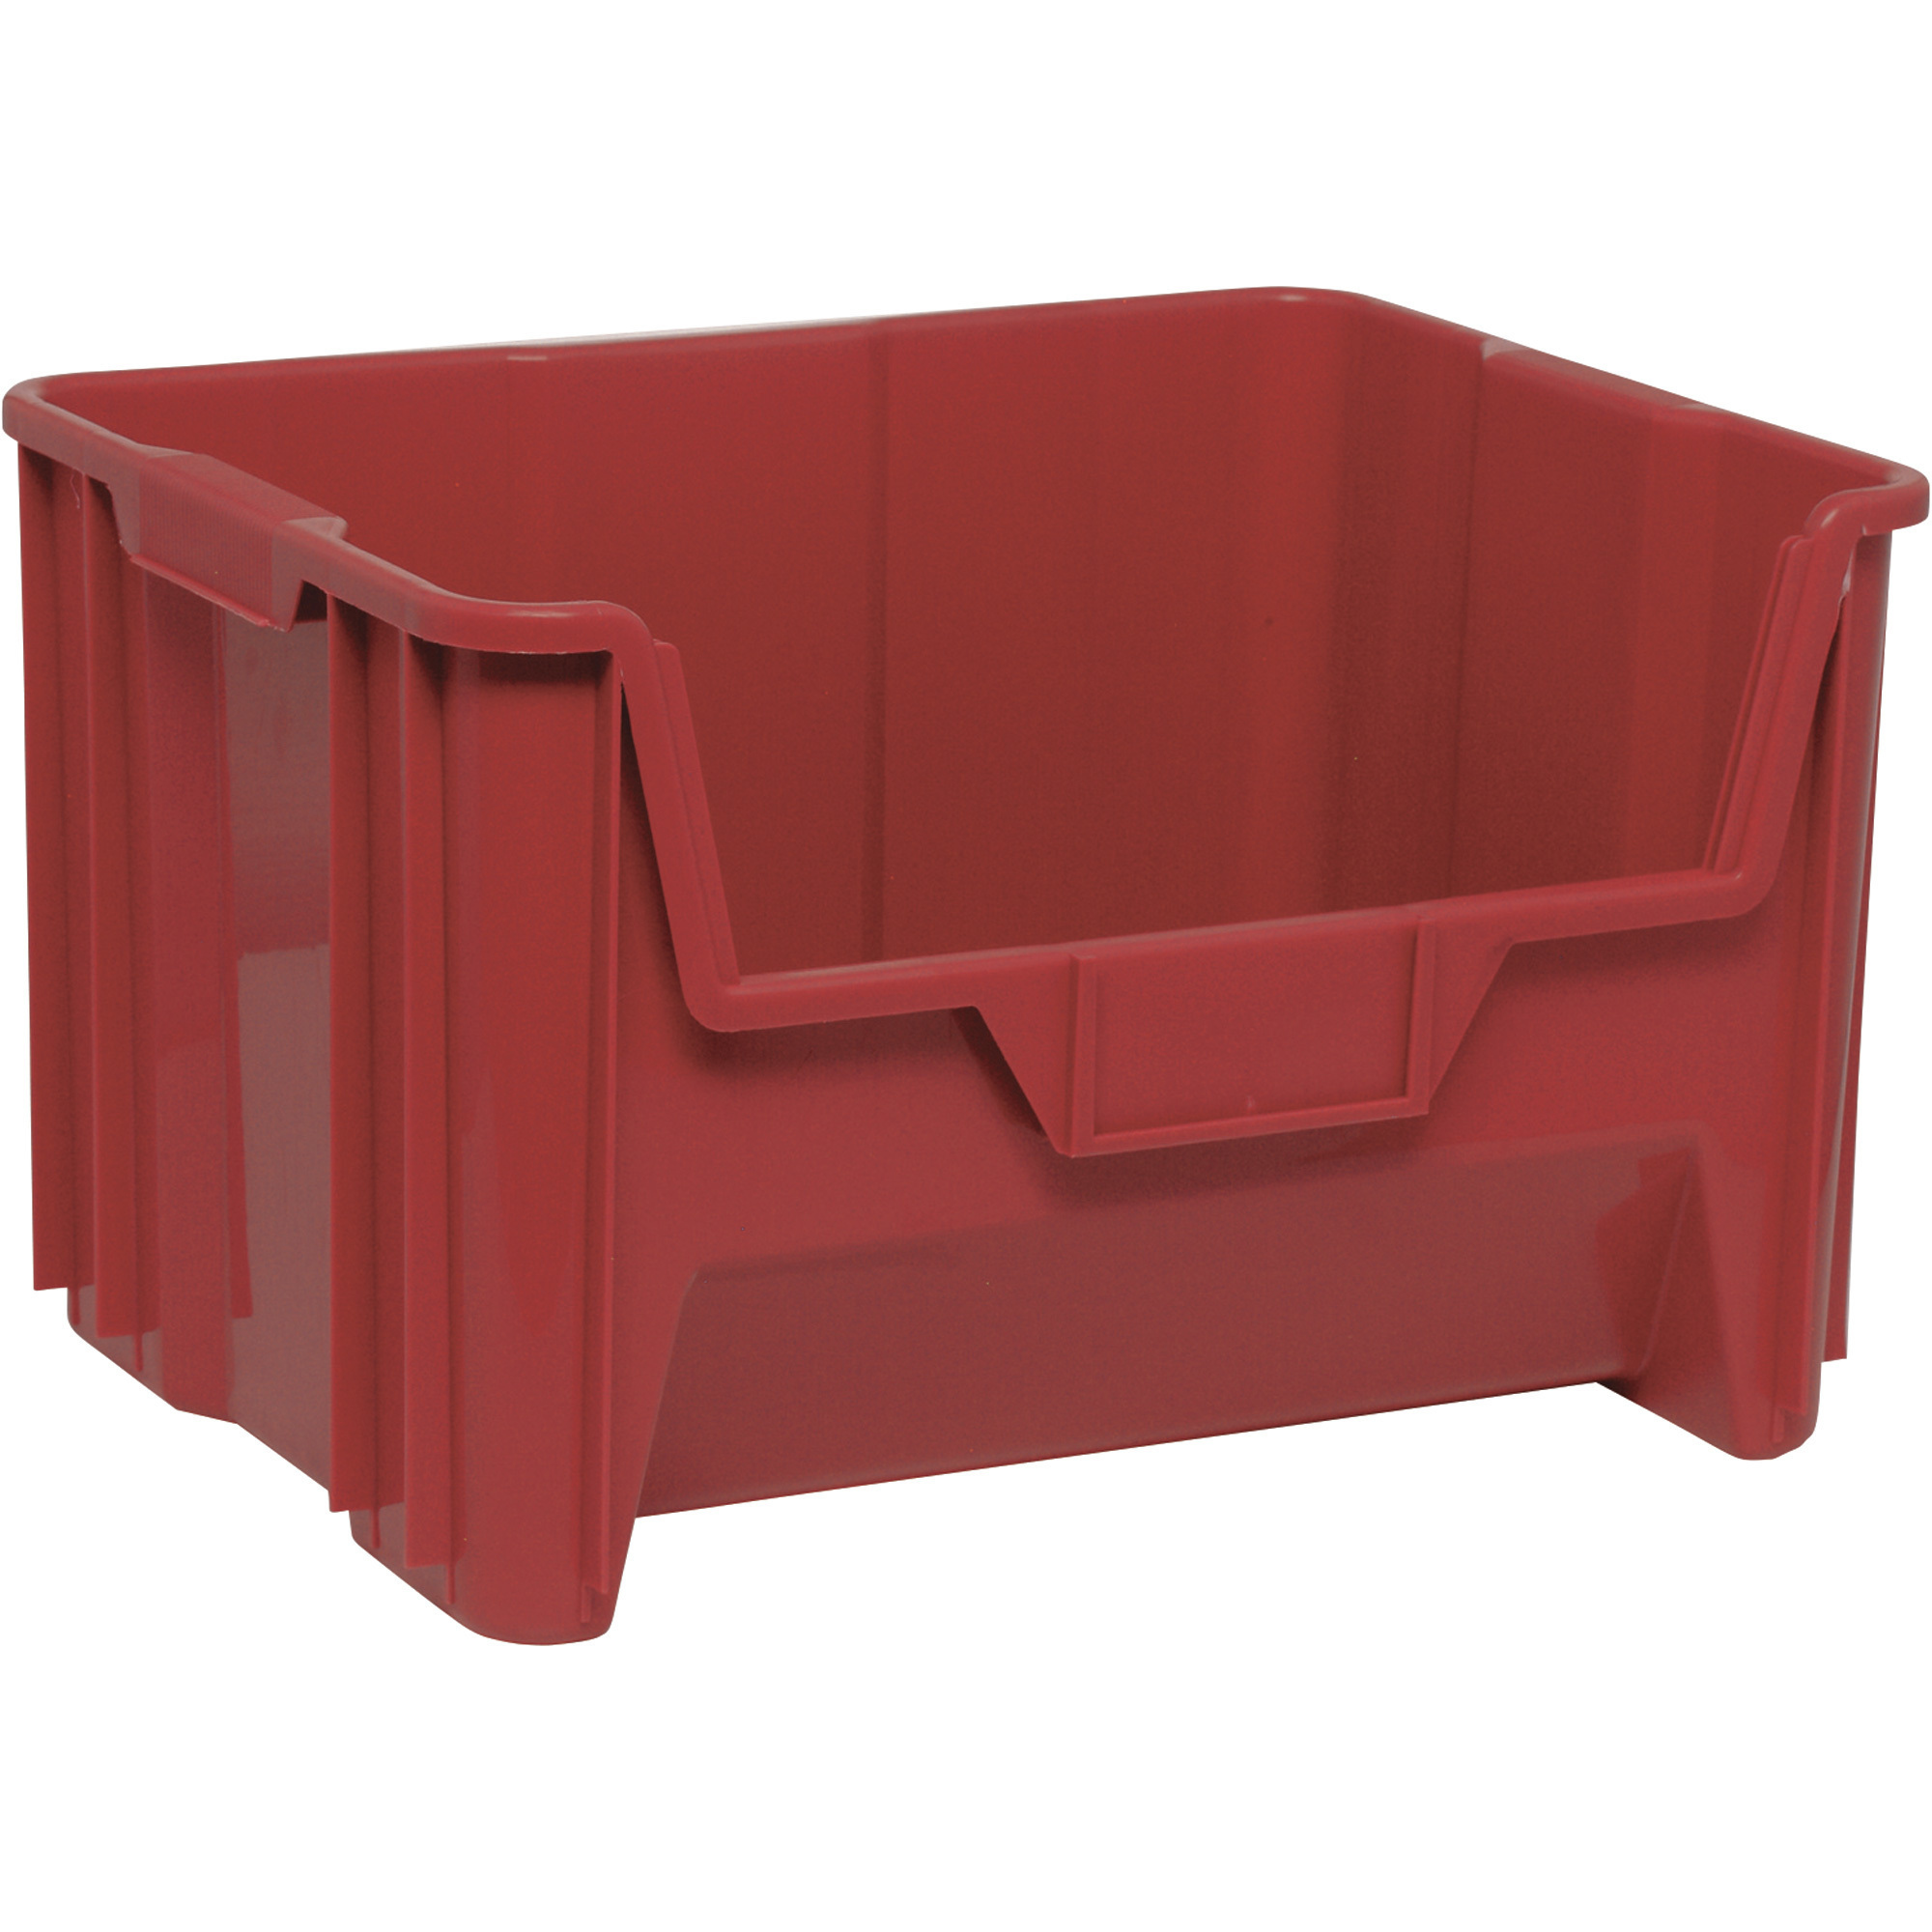 Quantum Storage Giant Stack Container, 3-Pack, 15 1/4Inch L x 19 7/8Inch W x 12 7/16Inch H, Red, Model QGH700RDCS